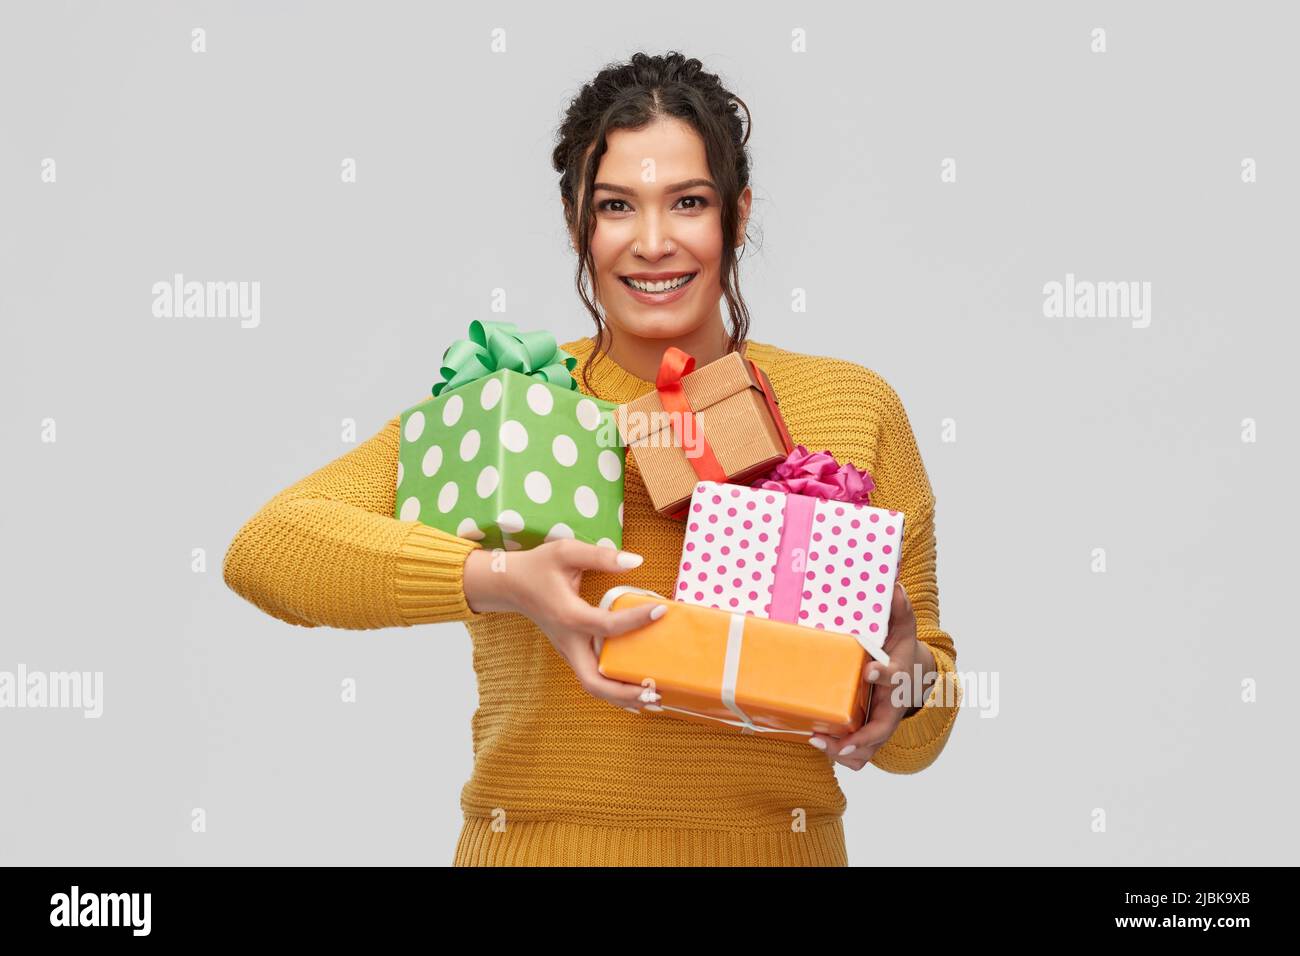 smiling young woman holding gift boxes Stock Photo